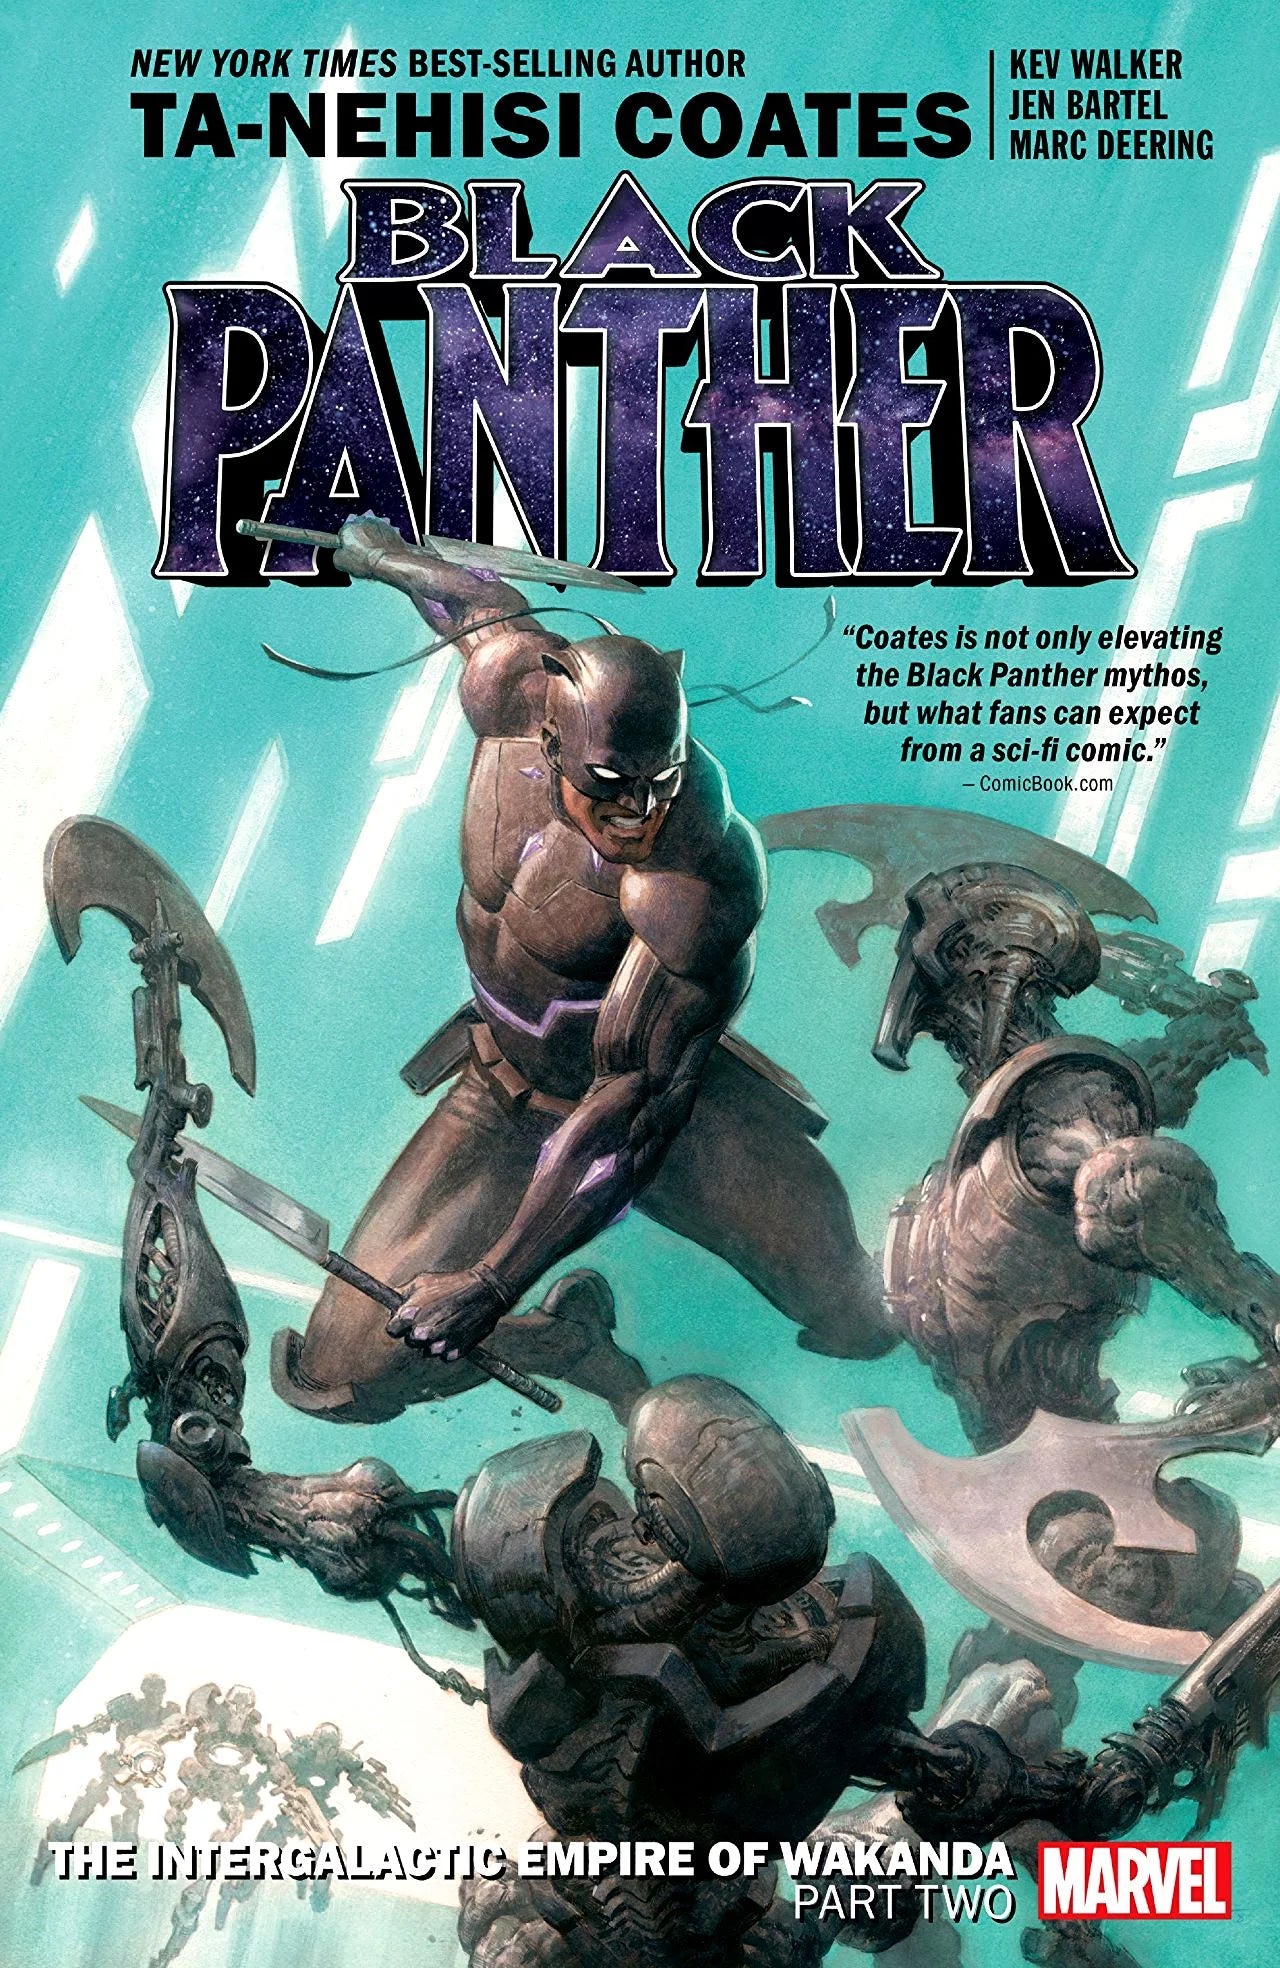 BLACK PANTHER TP BOOK 07 THE INTERGALACTIC EMPIRE OF WAKANDA PT 02